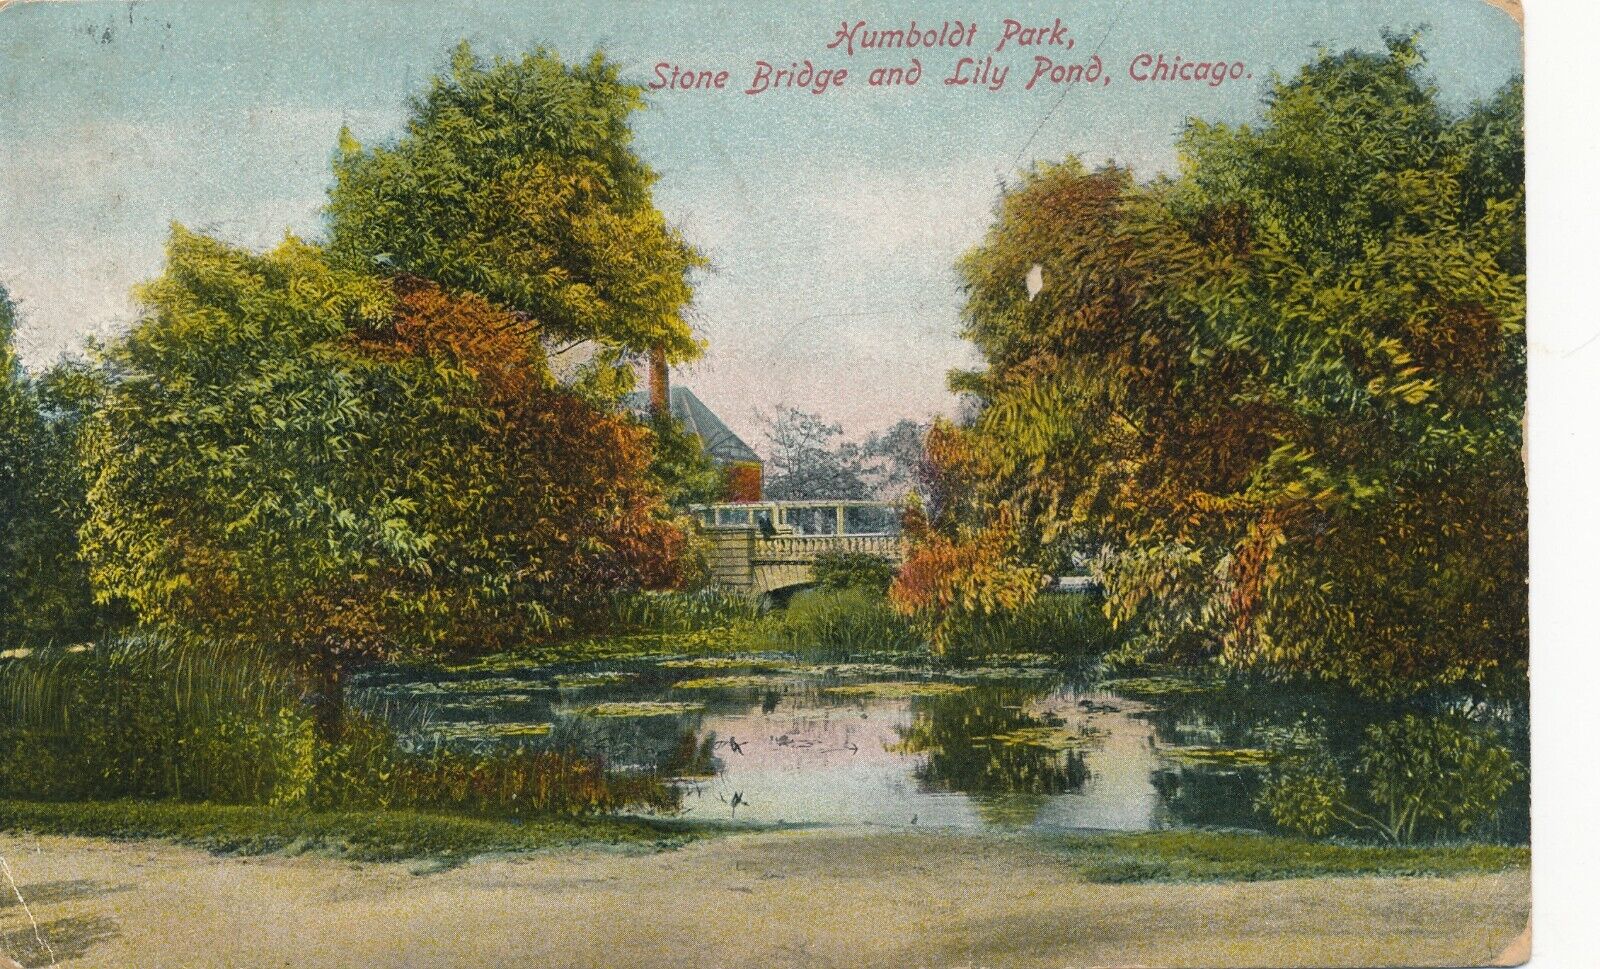 Humboldt Park Stone Bridge and Lily Pond in Chicago, IL 1911 posted postcard